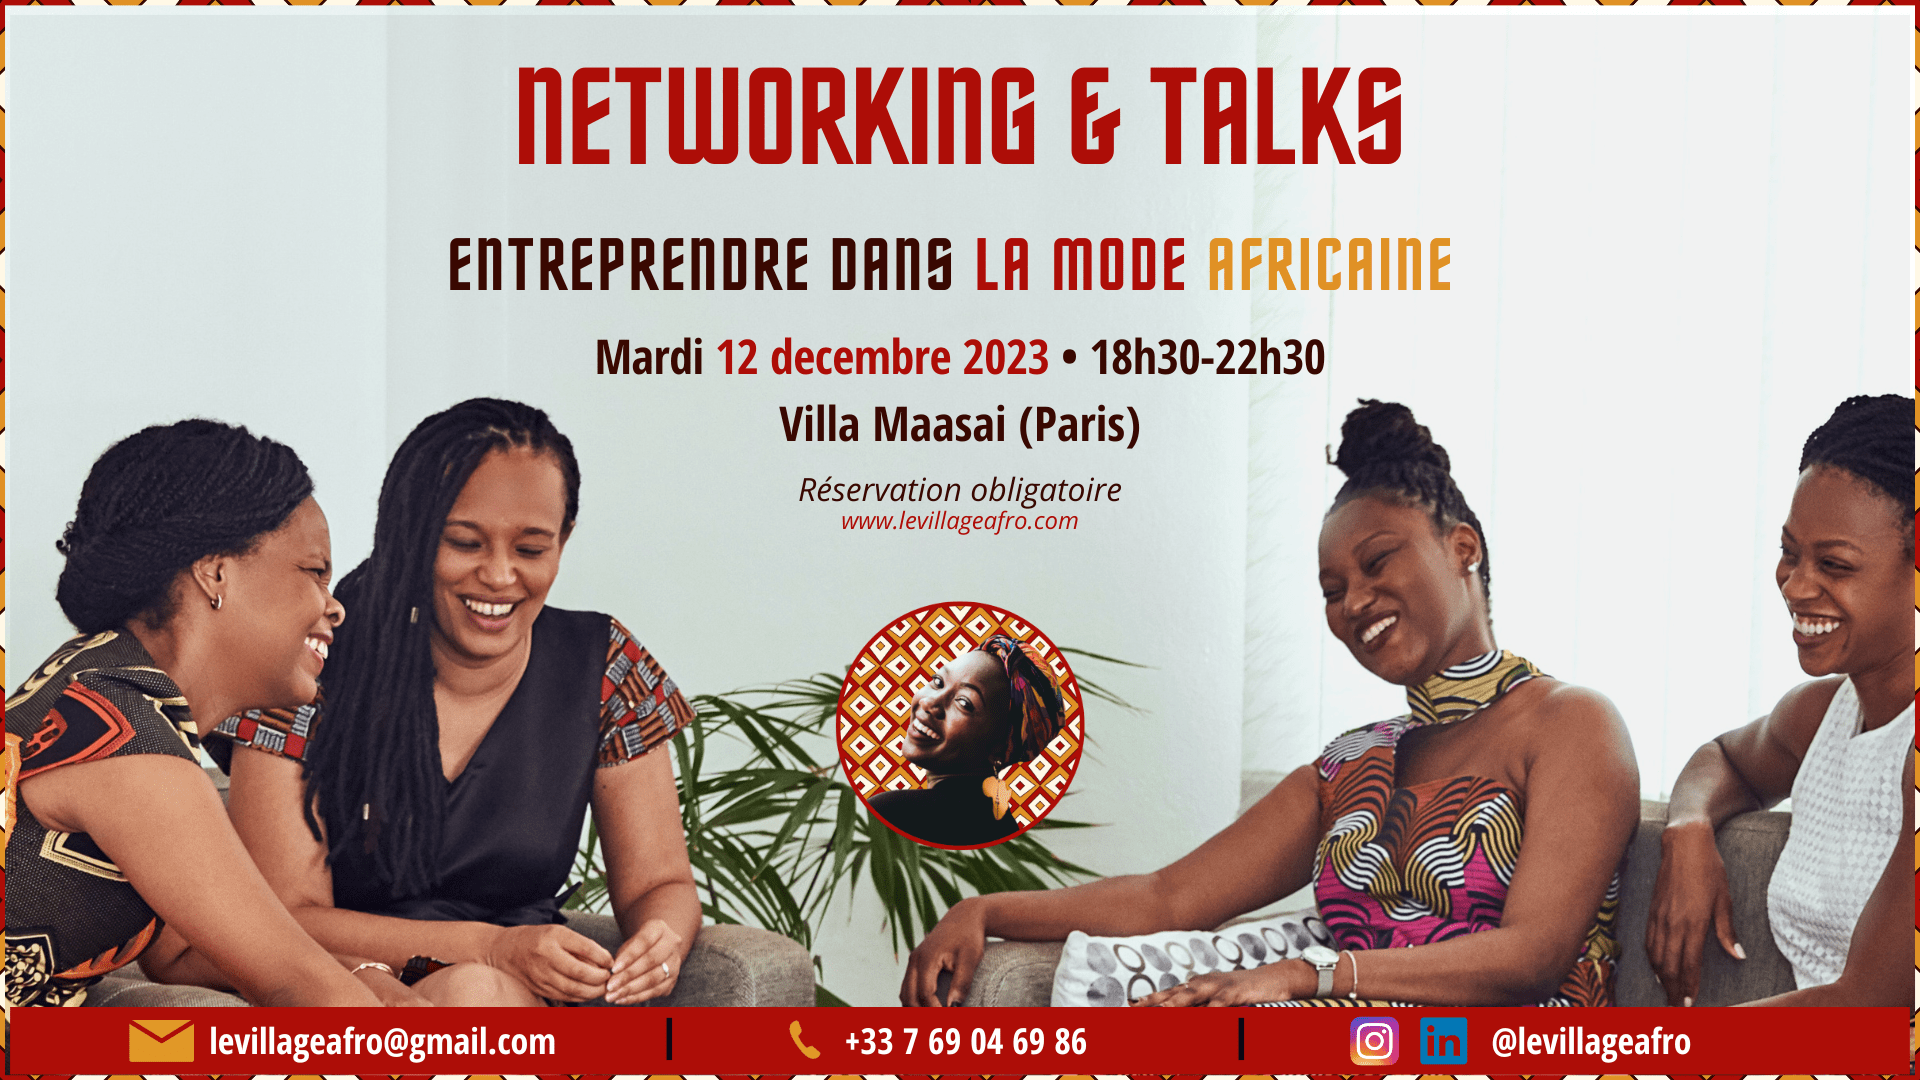 Networking & Talks - Mode africaine